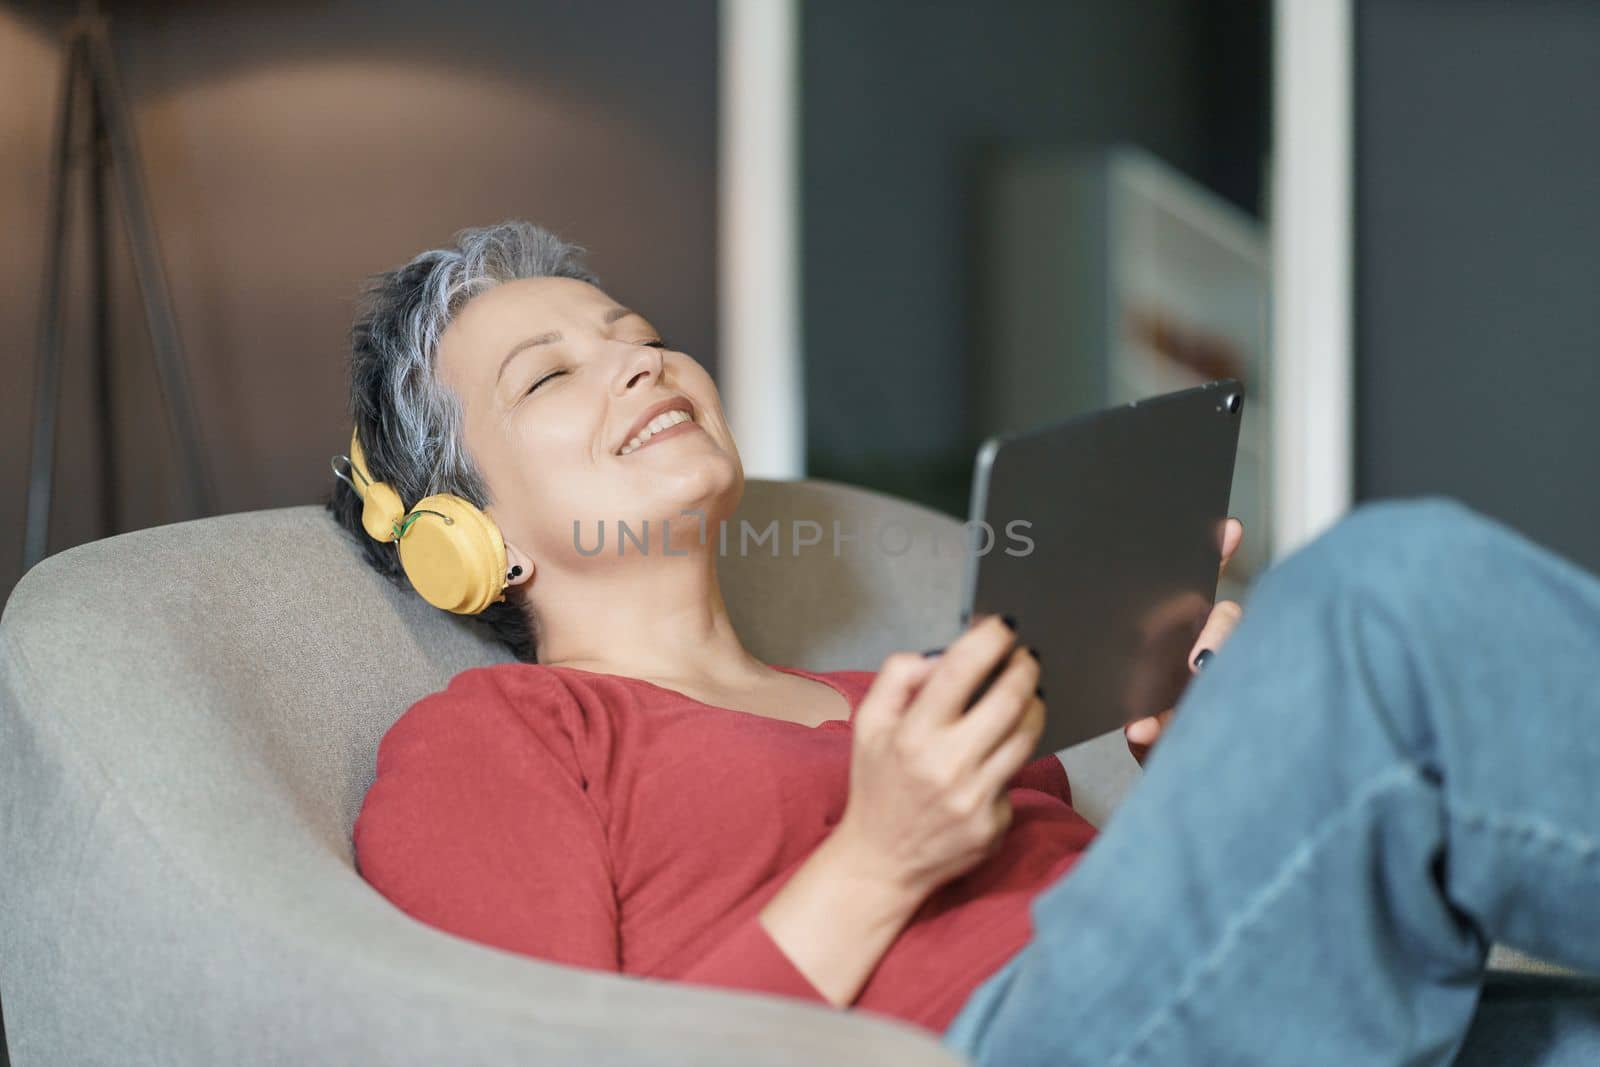 Mature woman with grey hair is depicted listening to music while sitting on sofa in her home. She has her eyes closed and is holding a tablet in her hands. High quality photo